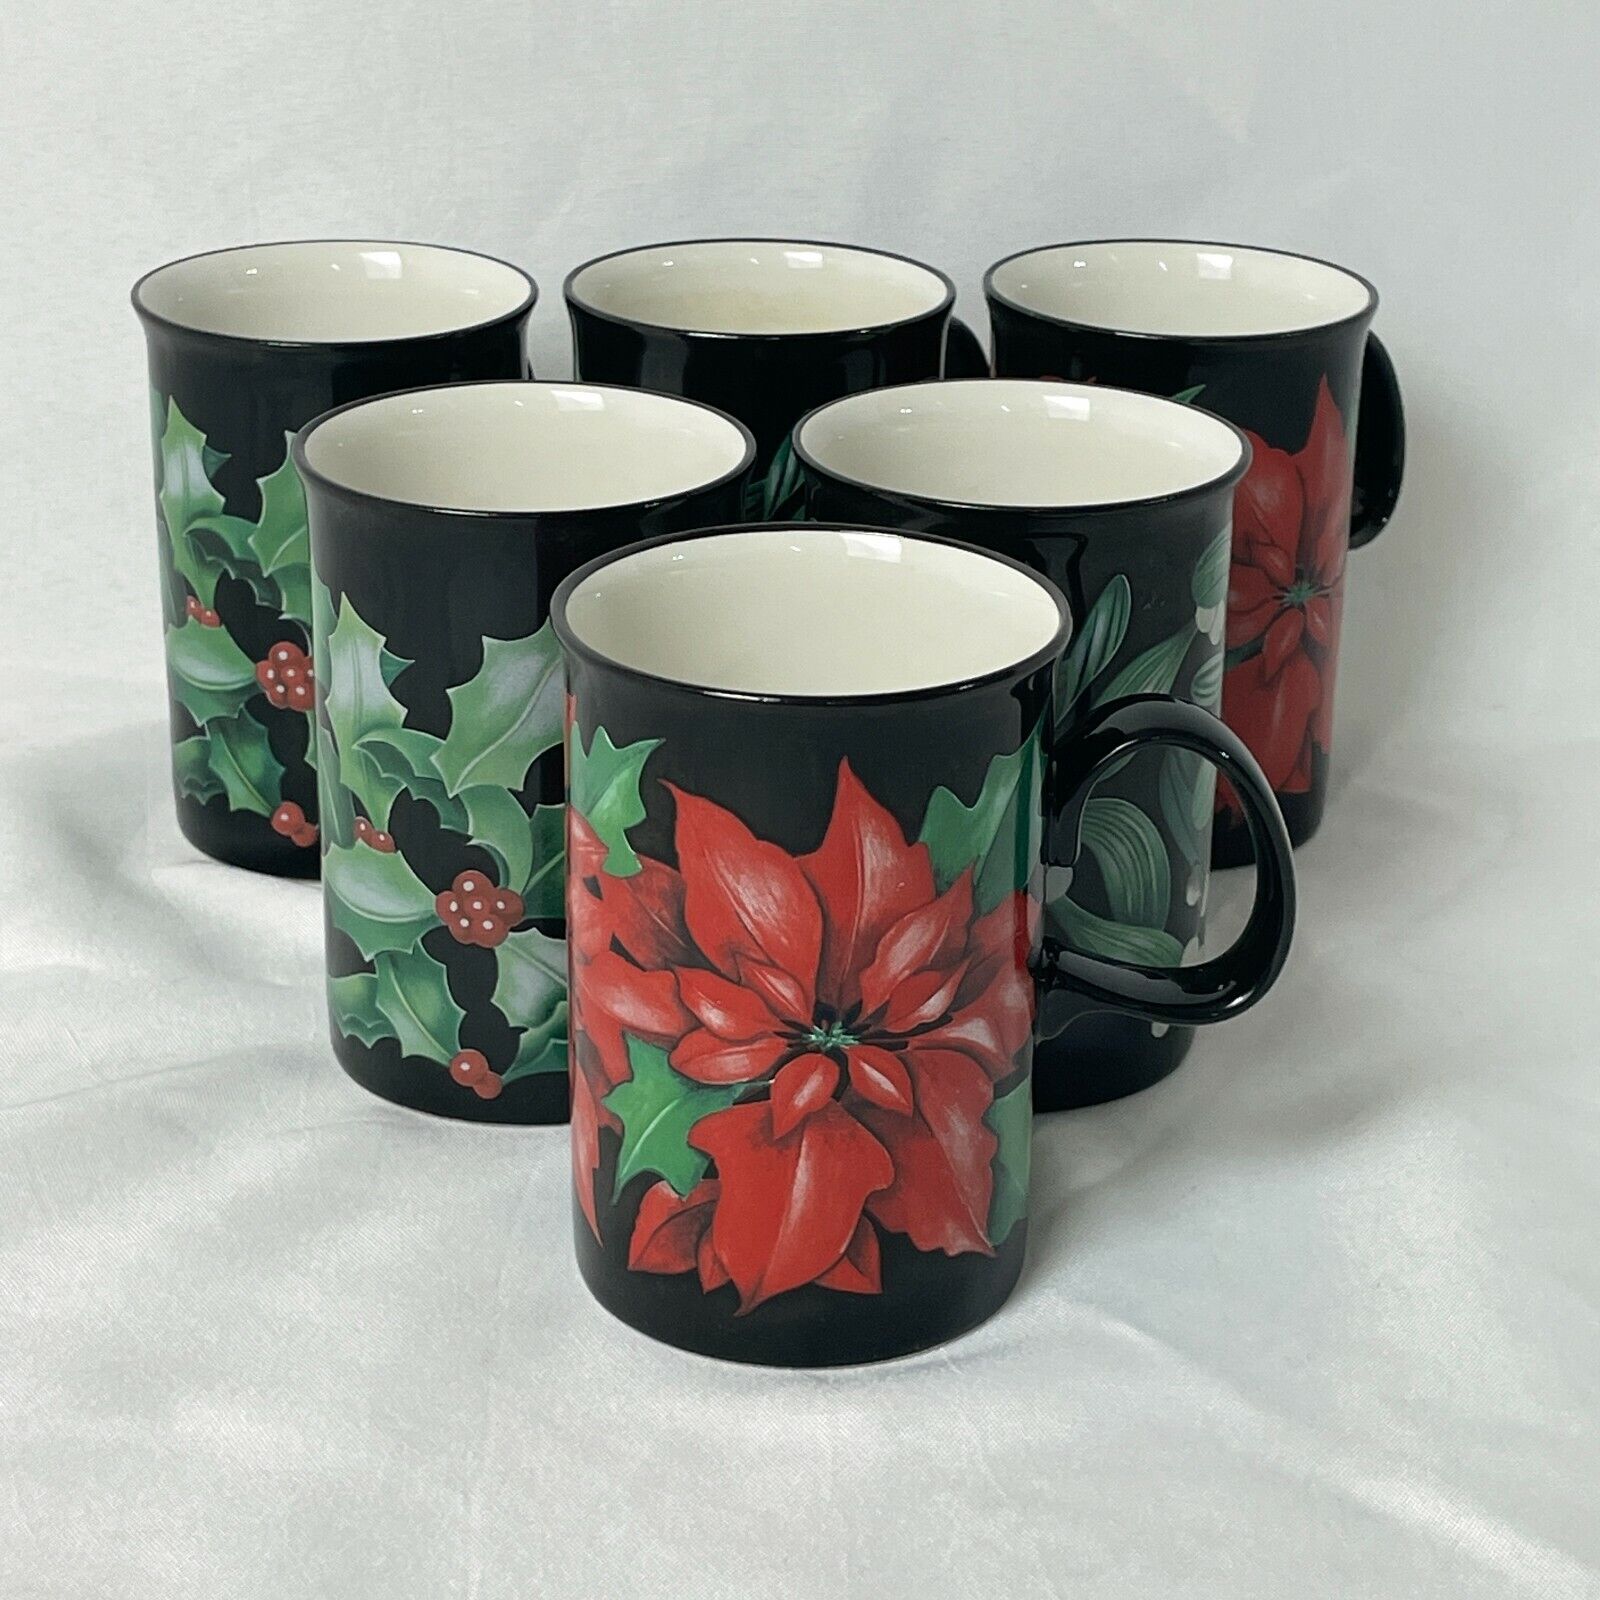 LOT OF 6 DUNOON POINSETTIA HOLLY & MISTLETOE COFFE CUPS 